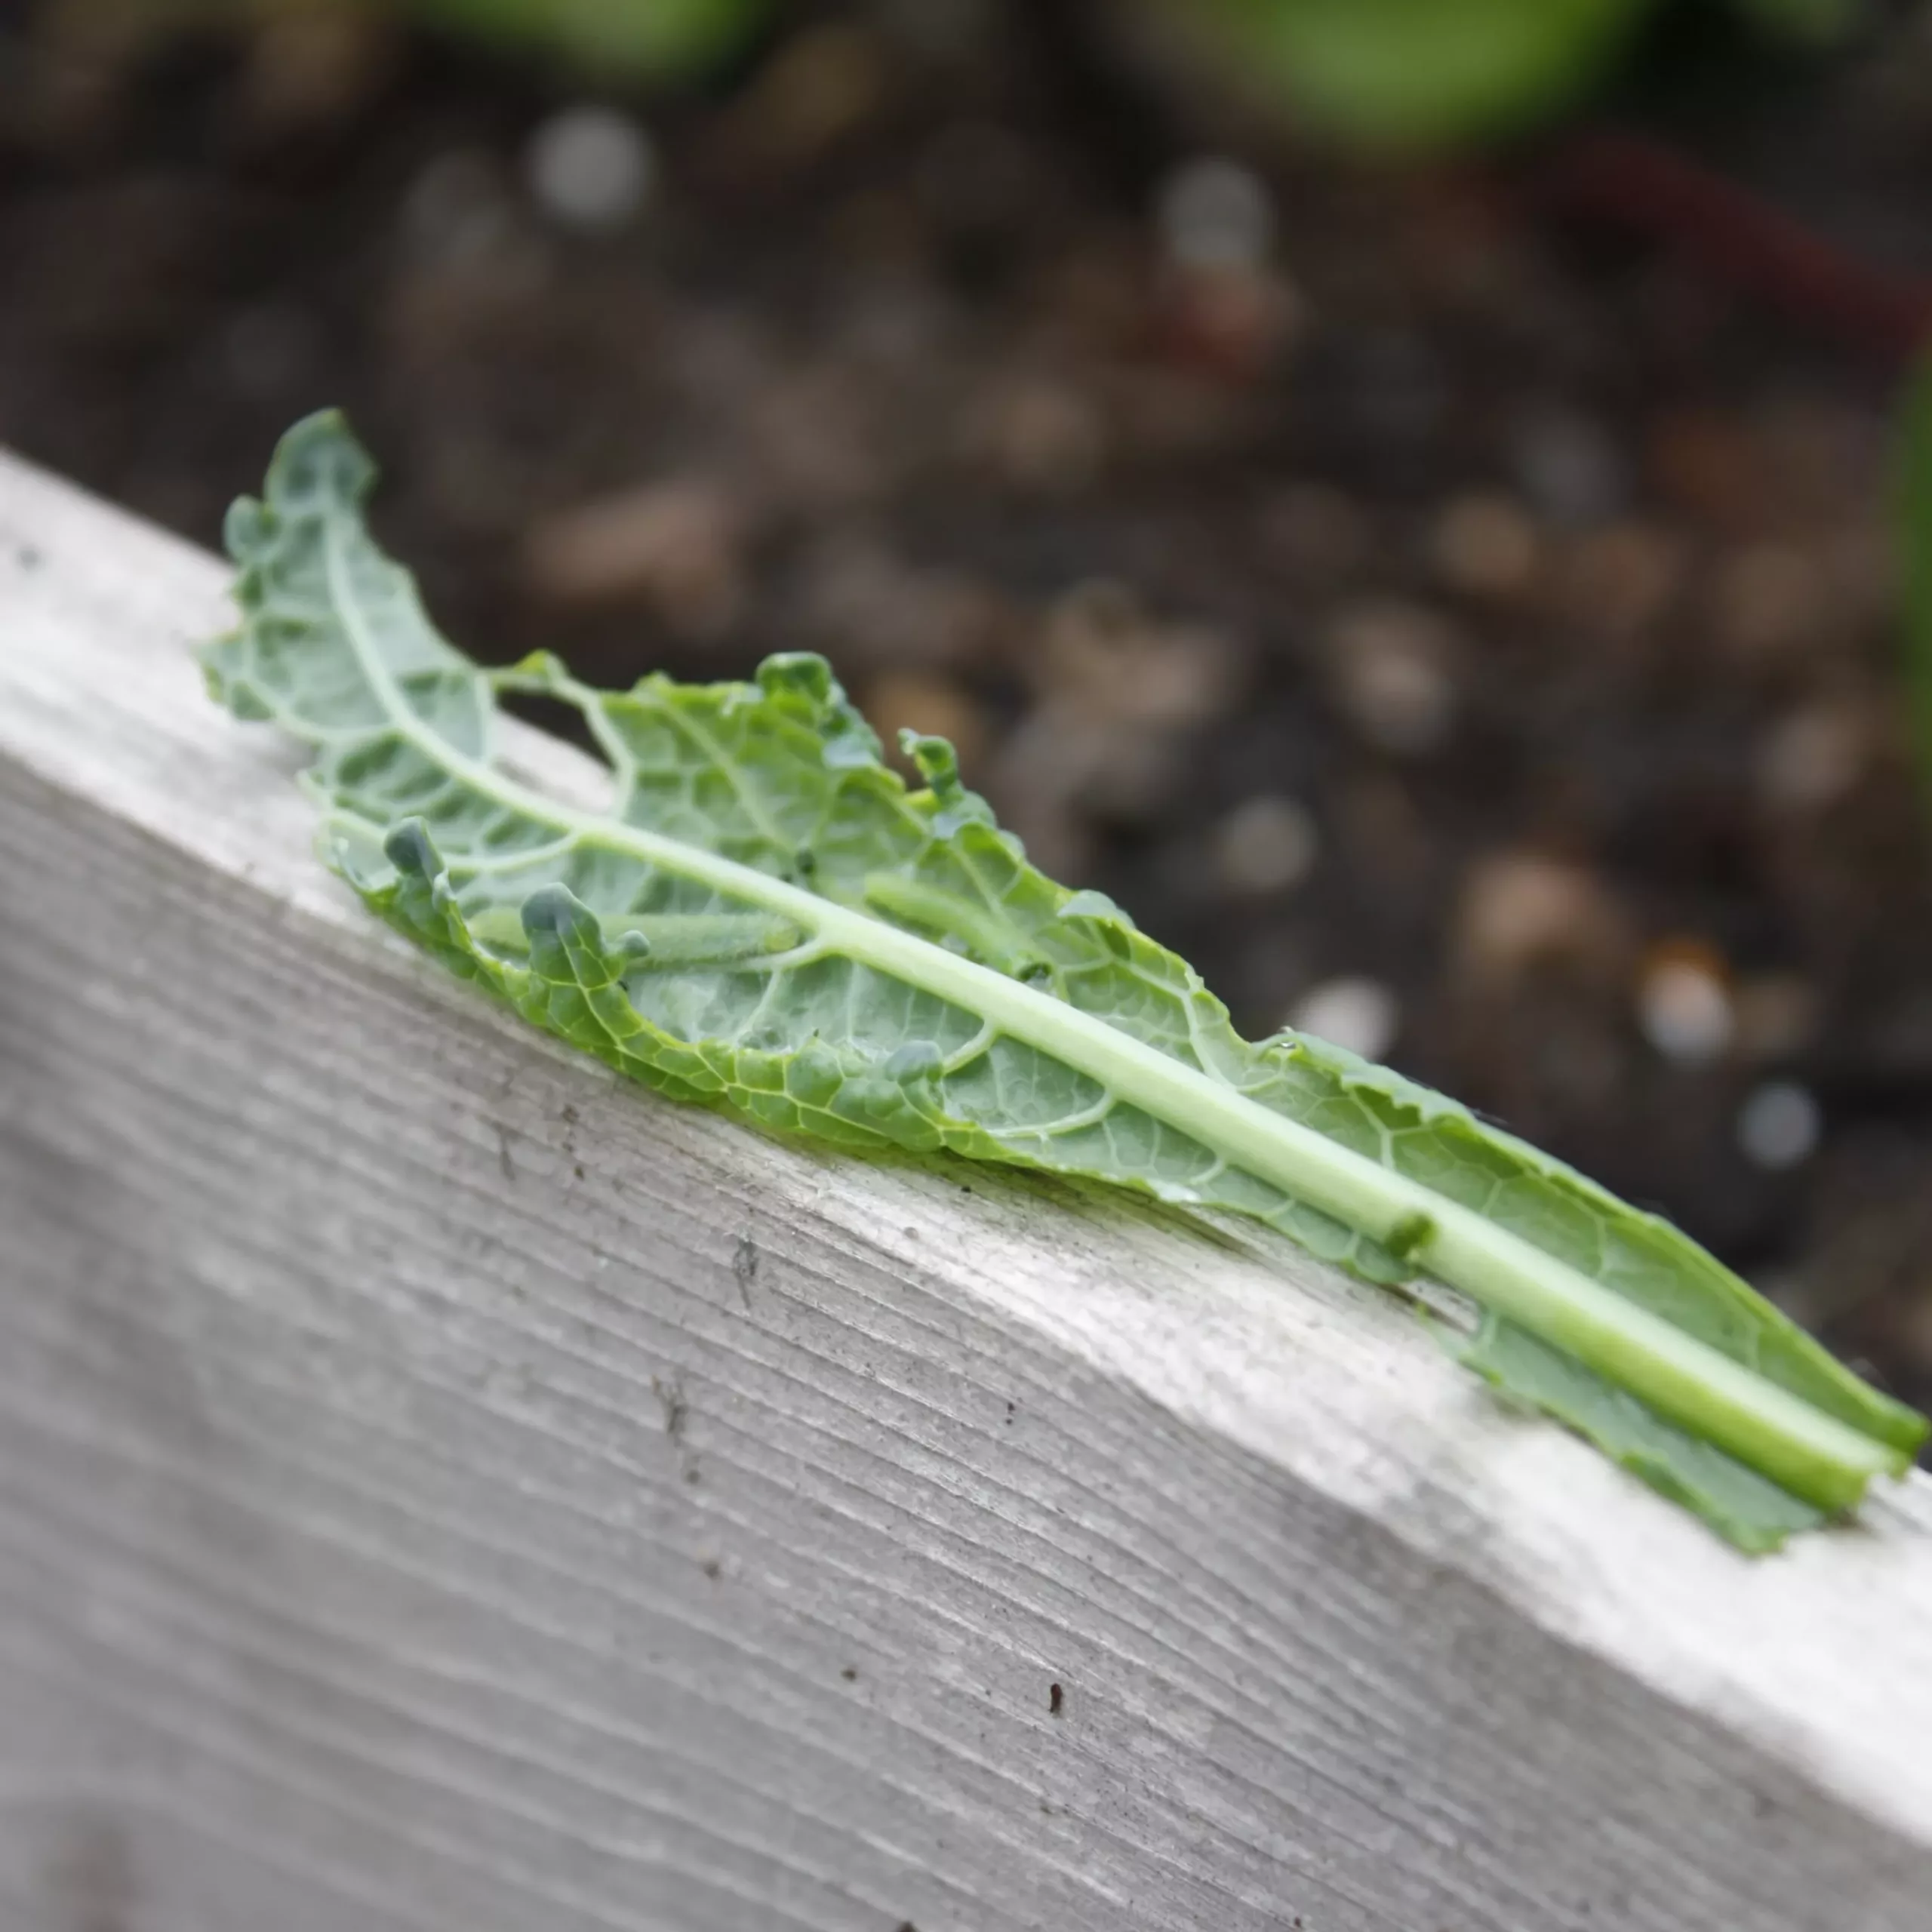 Two cabbage worms on a damaged kale leaf